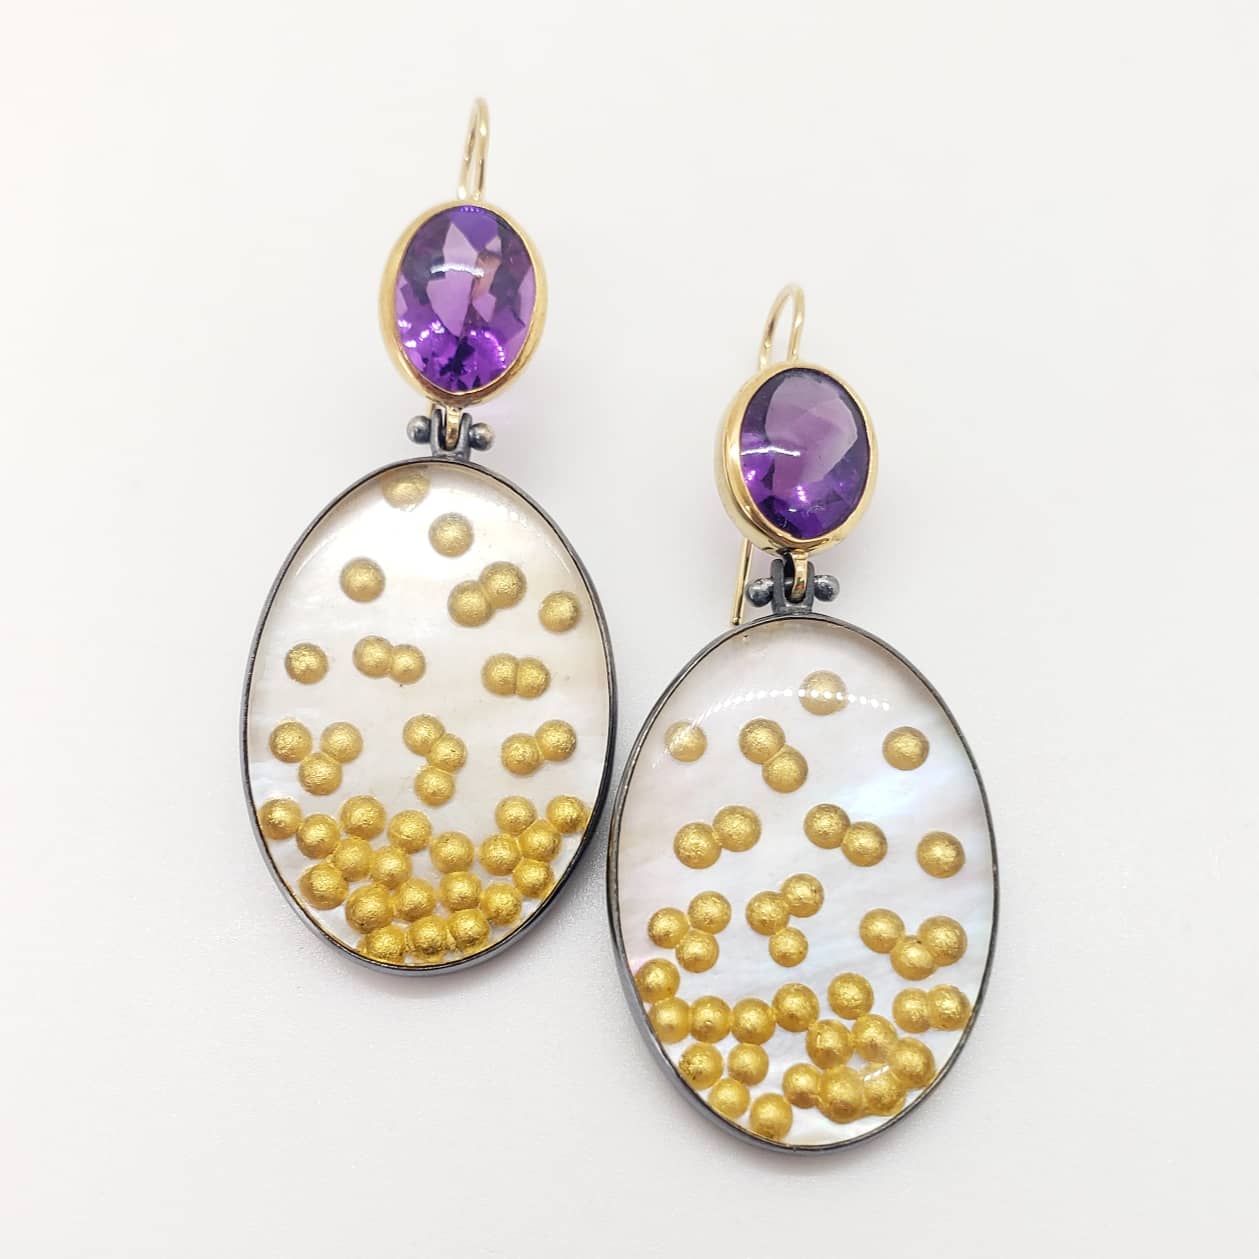 18k Gold and Oxidized Sterling Silver Earrings with Amethyst, Pearl Laminate and Gold Leaf